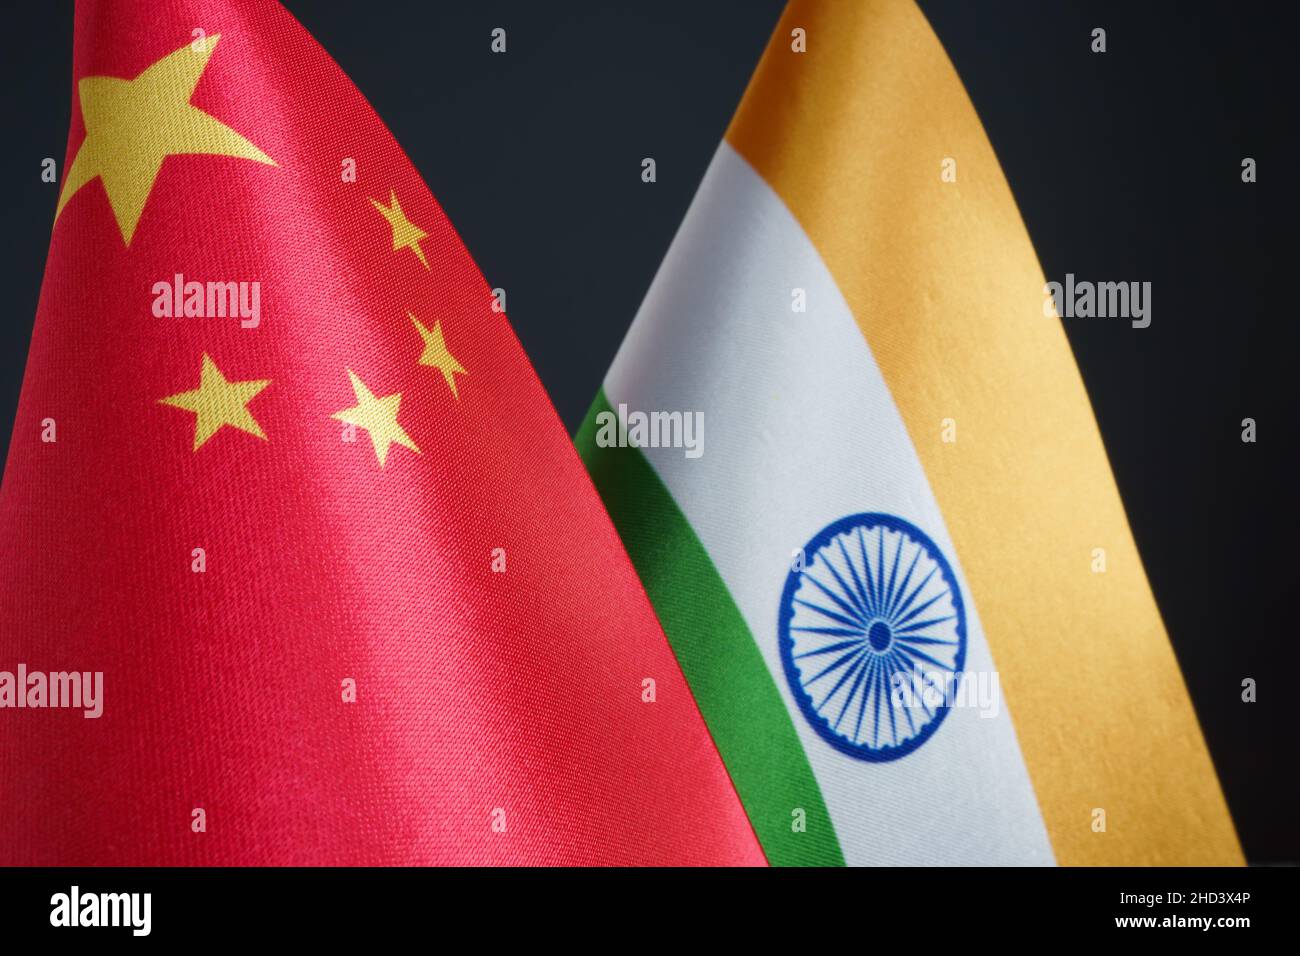 Flags of China and India in the dark. Stock Photo